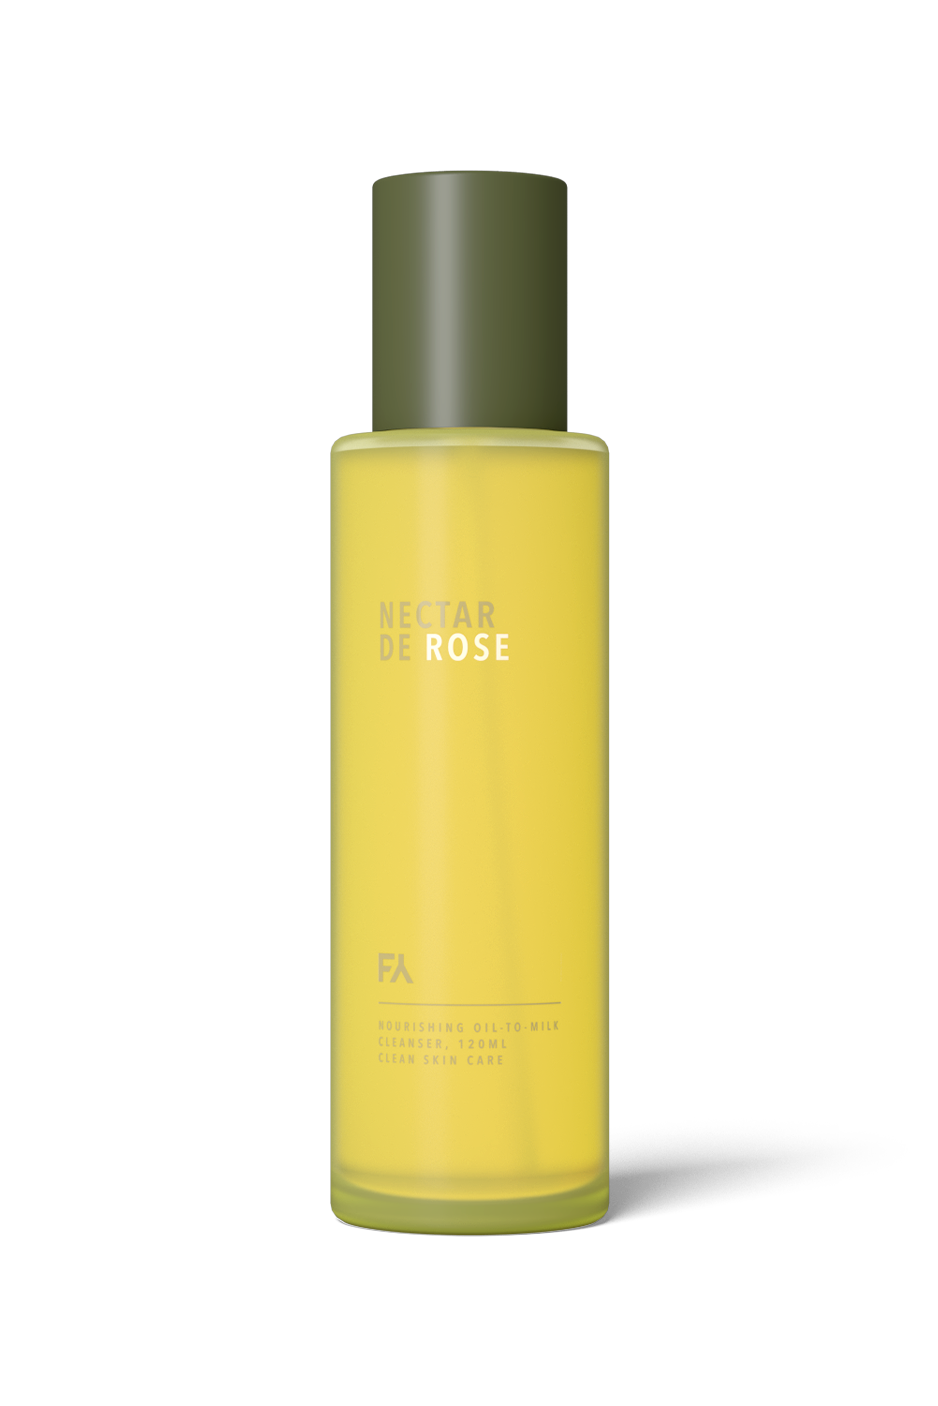 Product picture of the Nectar De Rose Nourishing Oil-to-Milk Cleanser with transparent background